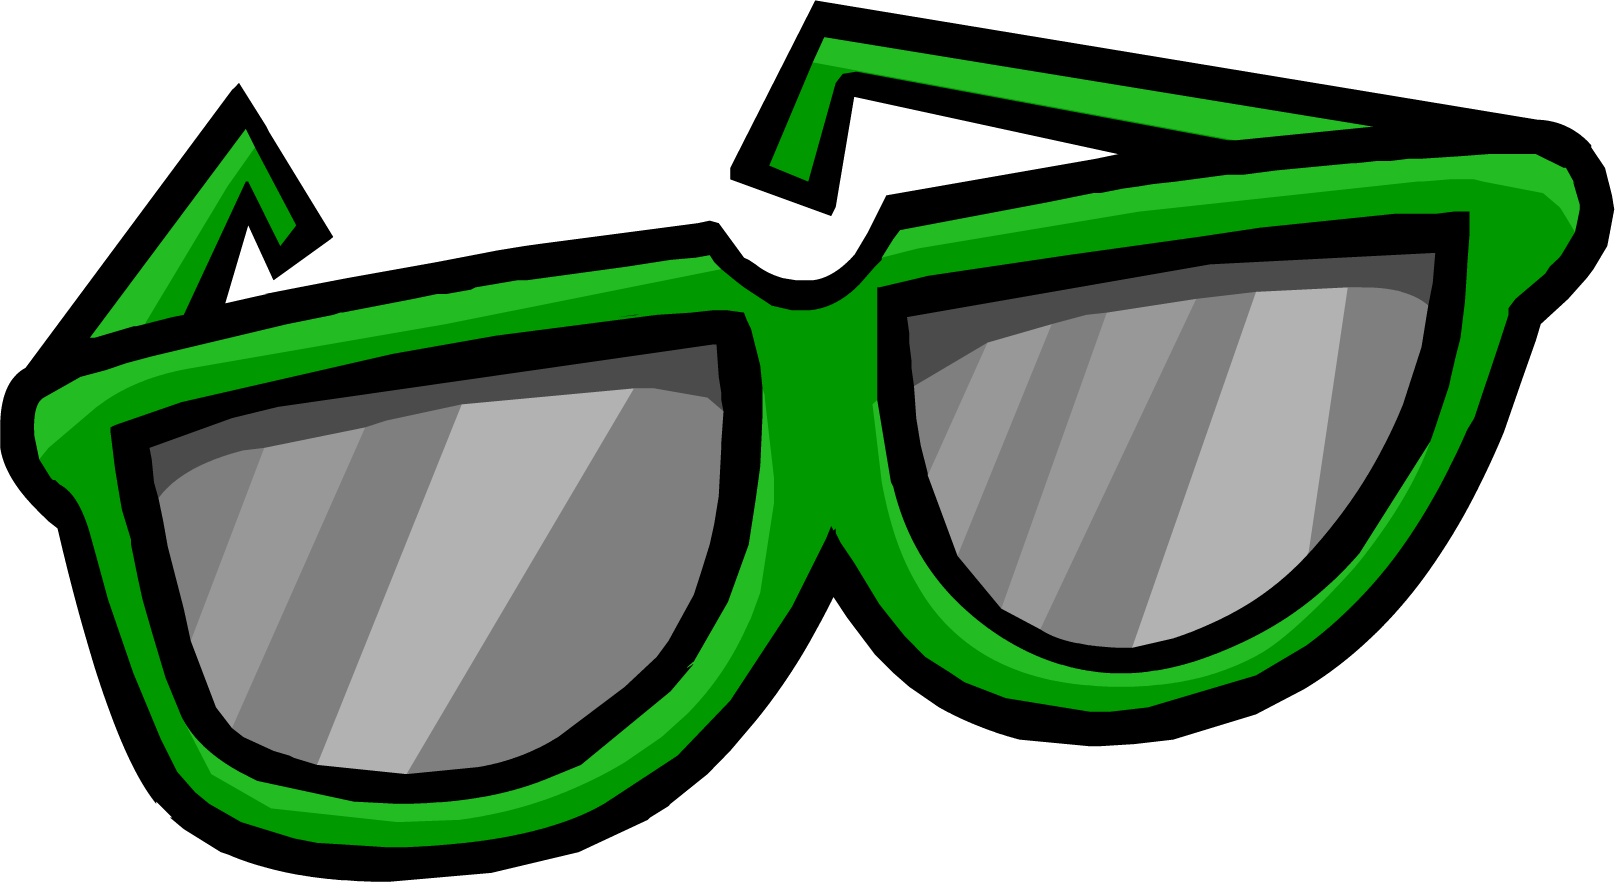 Download Sunglasses Clipart HQ PNG Image.